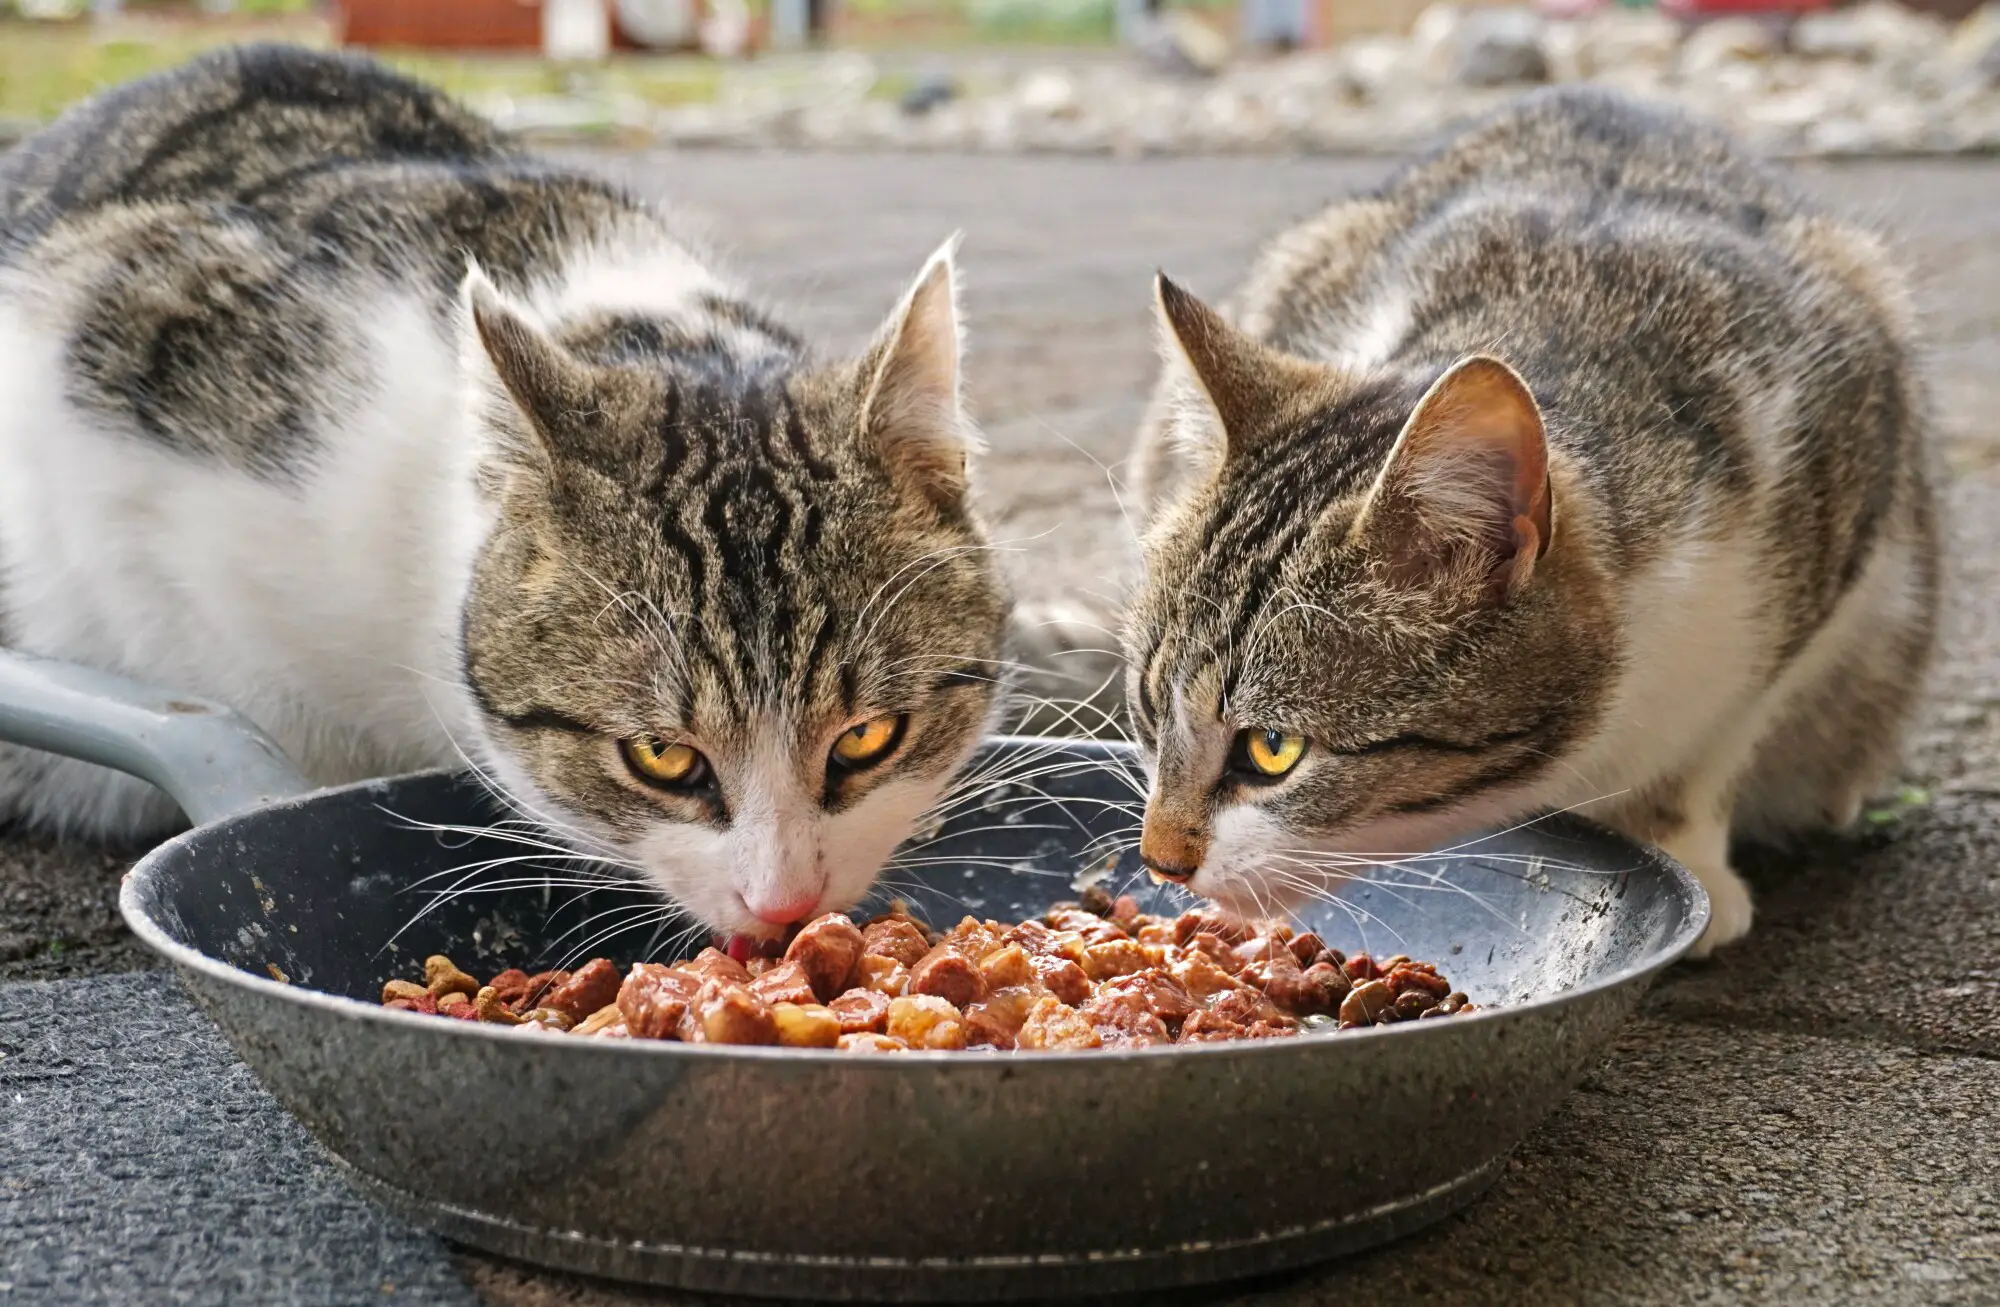 What Do Cats Like To Eat for Breakfast?